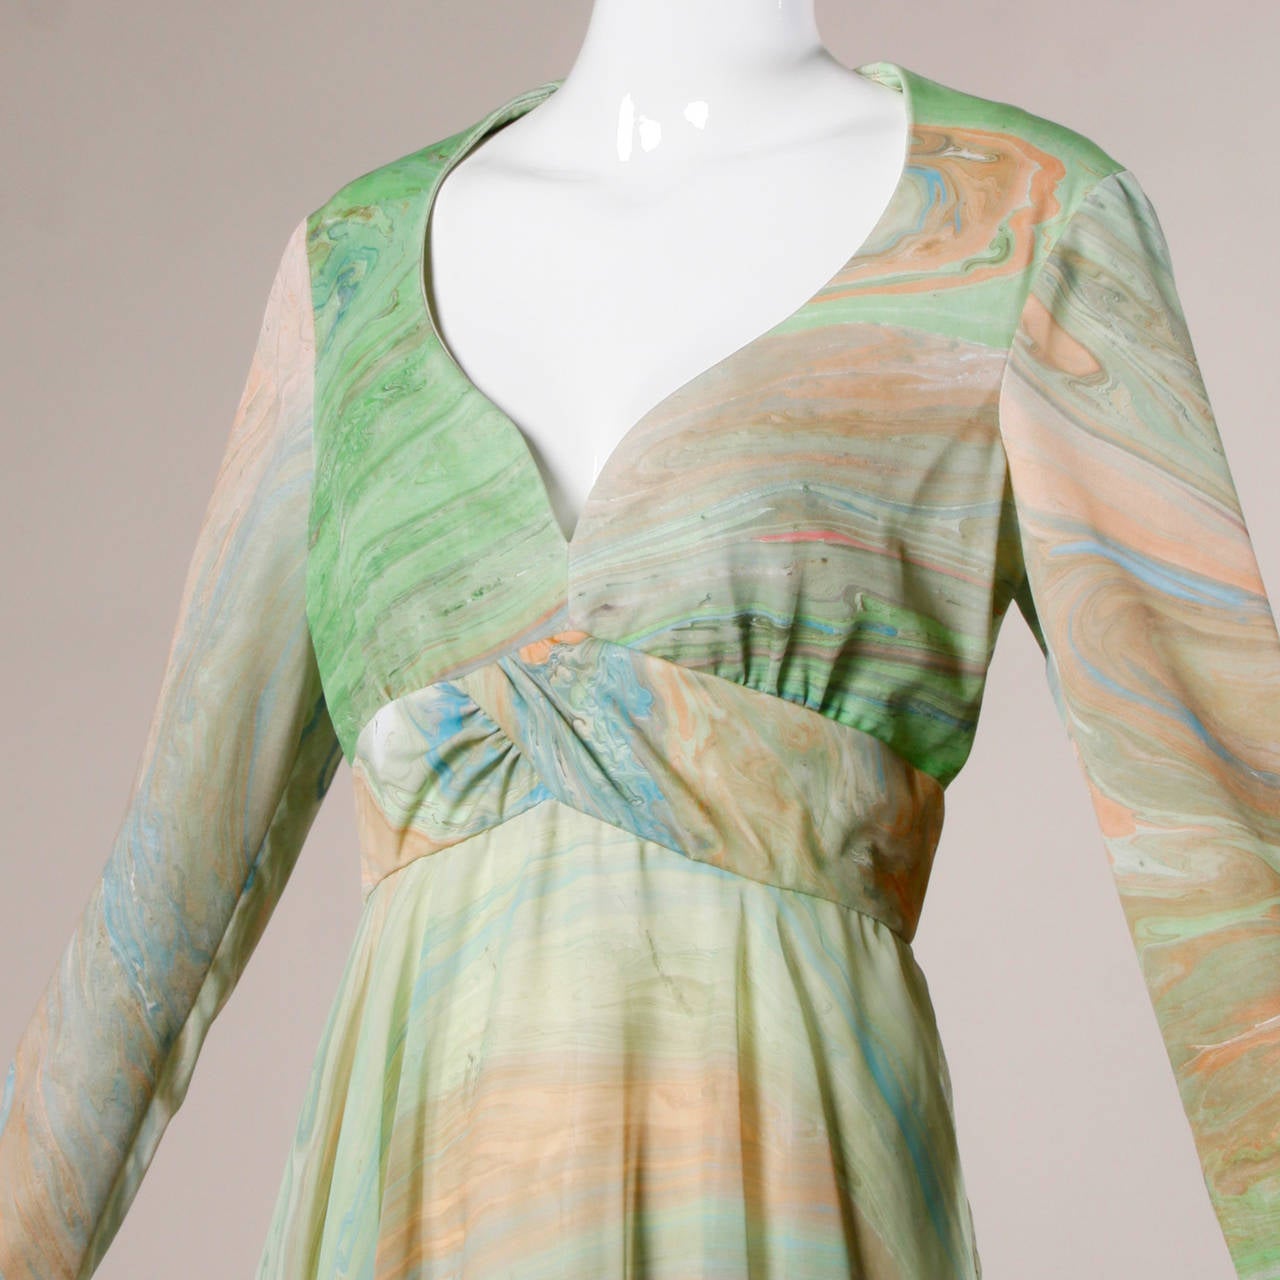 Vintage 1970s marbleized print maxi dress in earth tone shades of green, blue and sand by Don Luis for Bonwit Teller.

Details:

Fully Lined
Back Zip and Hook Closure
Marked Size: 14
Estimated Size: M-L
Color: Marbleized Swirl
Fabric: Not